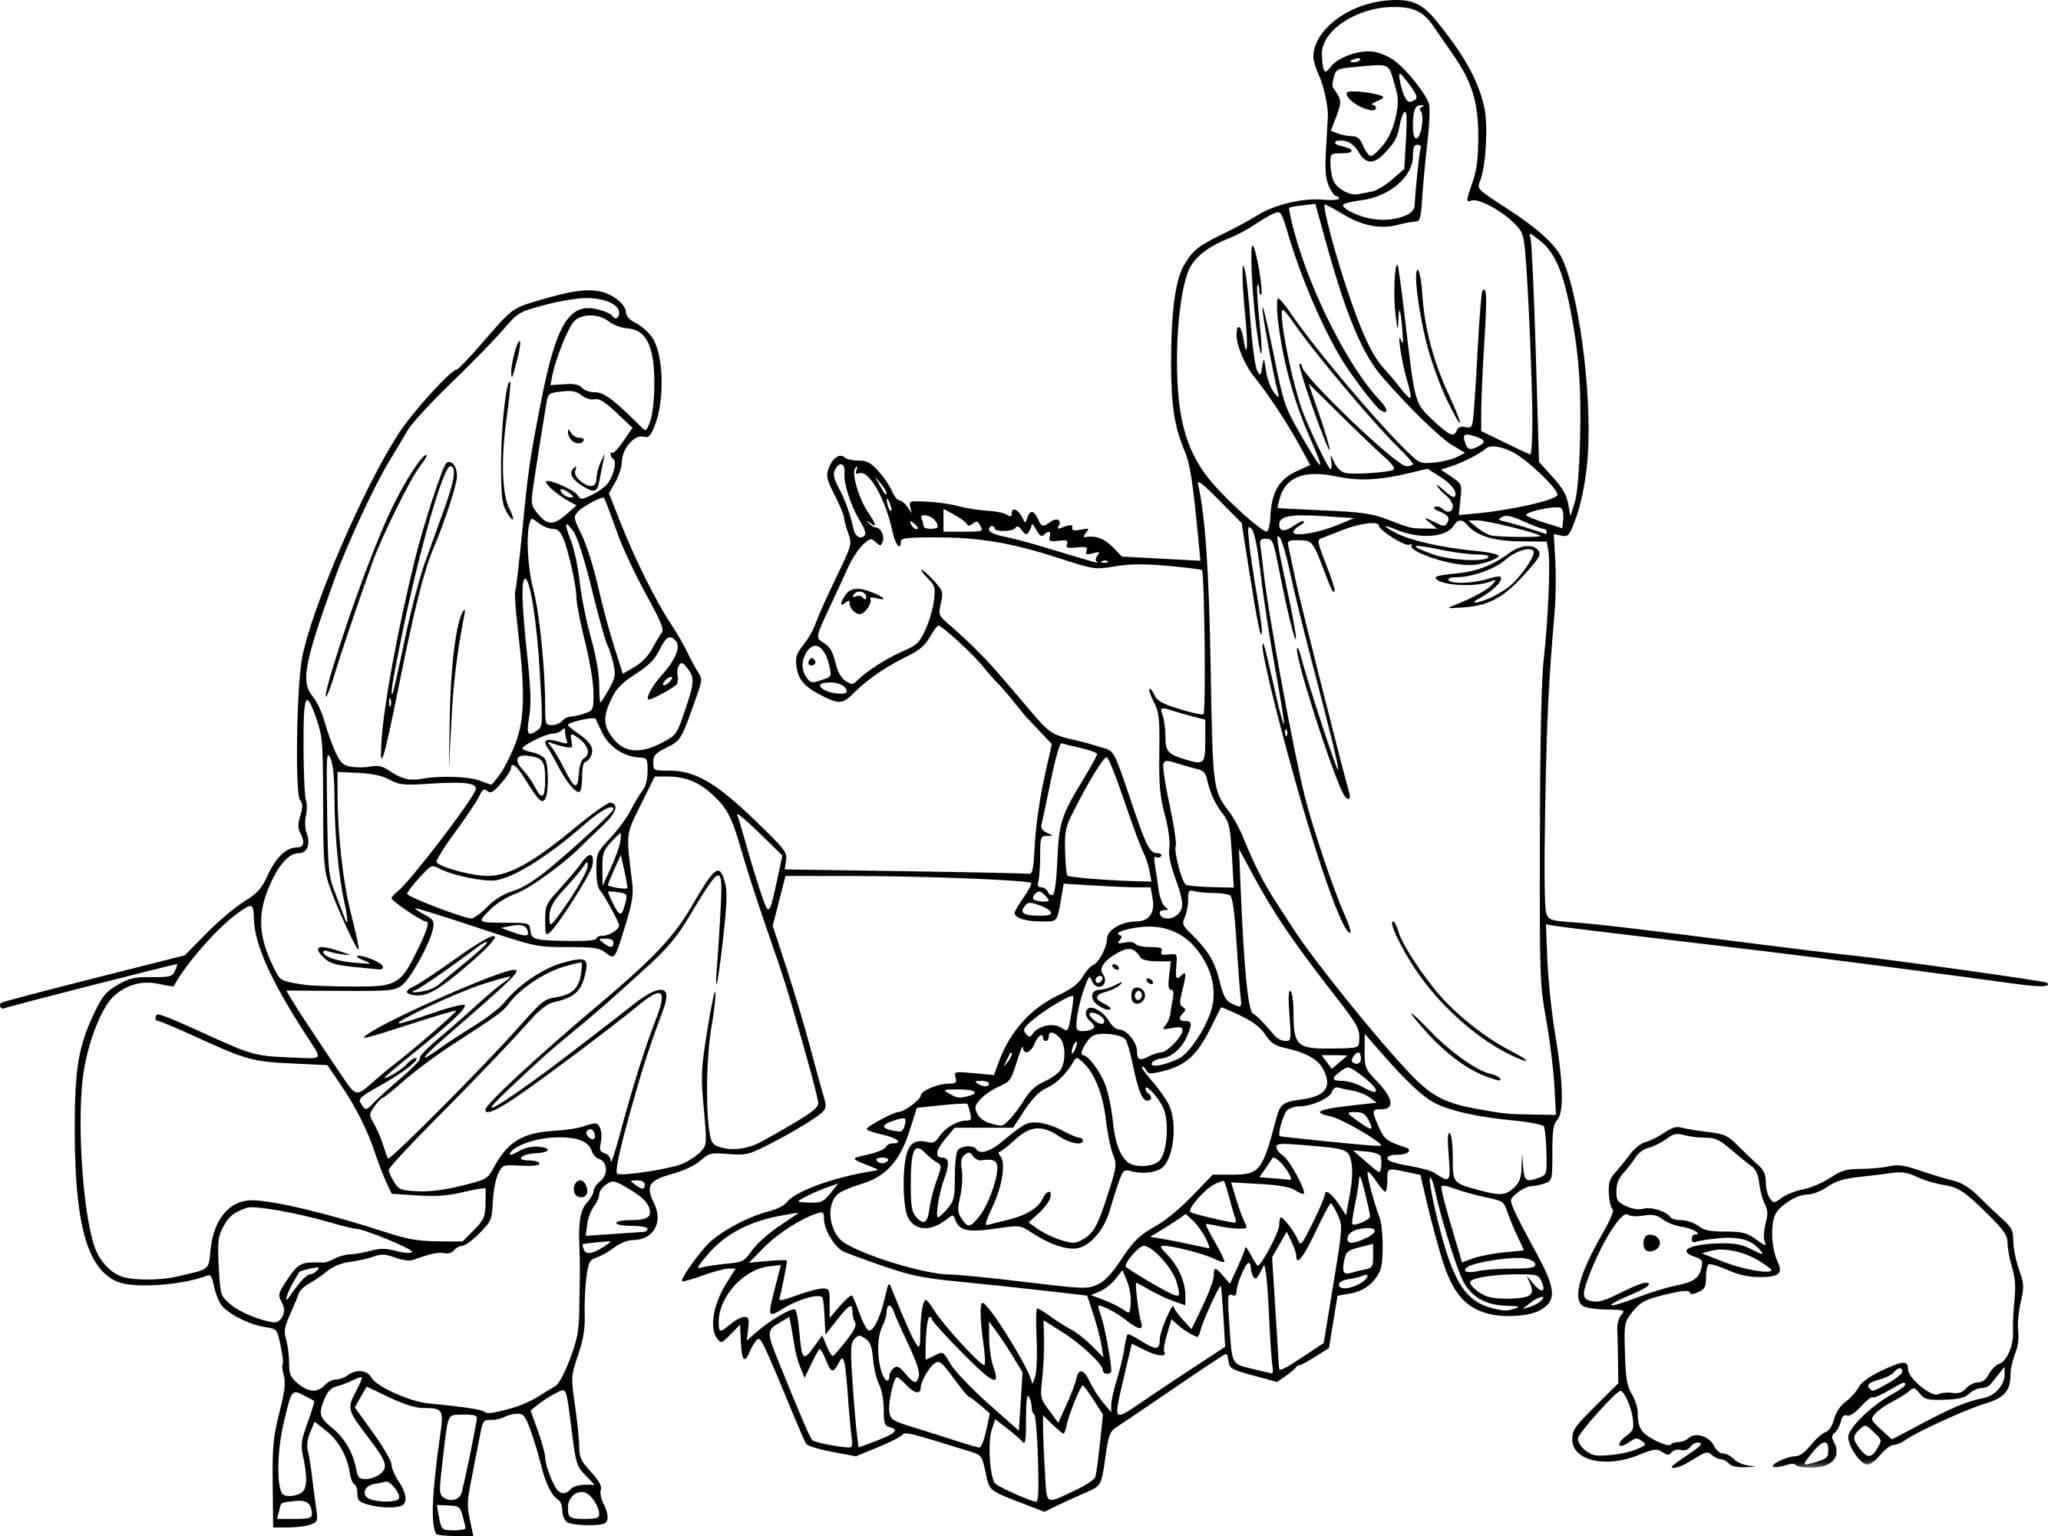 The Most Holy Theotokos And Joseph Coloring Page